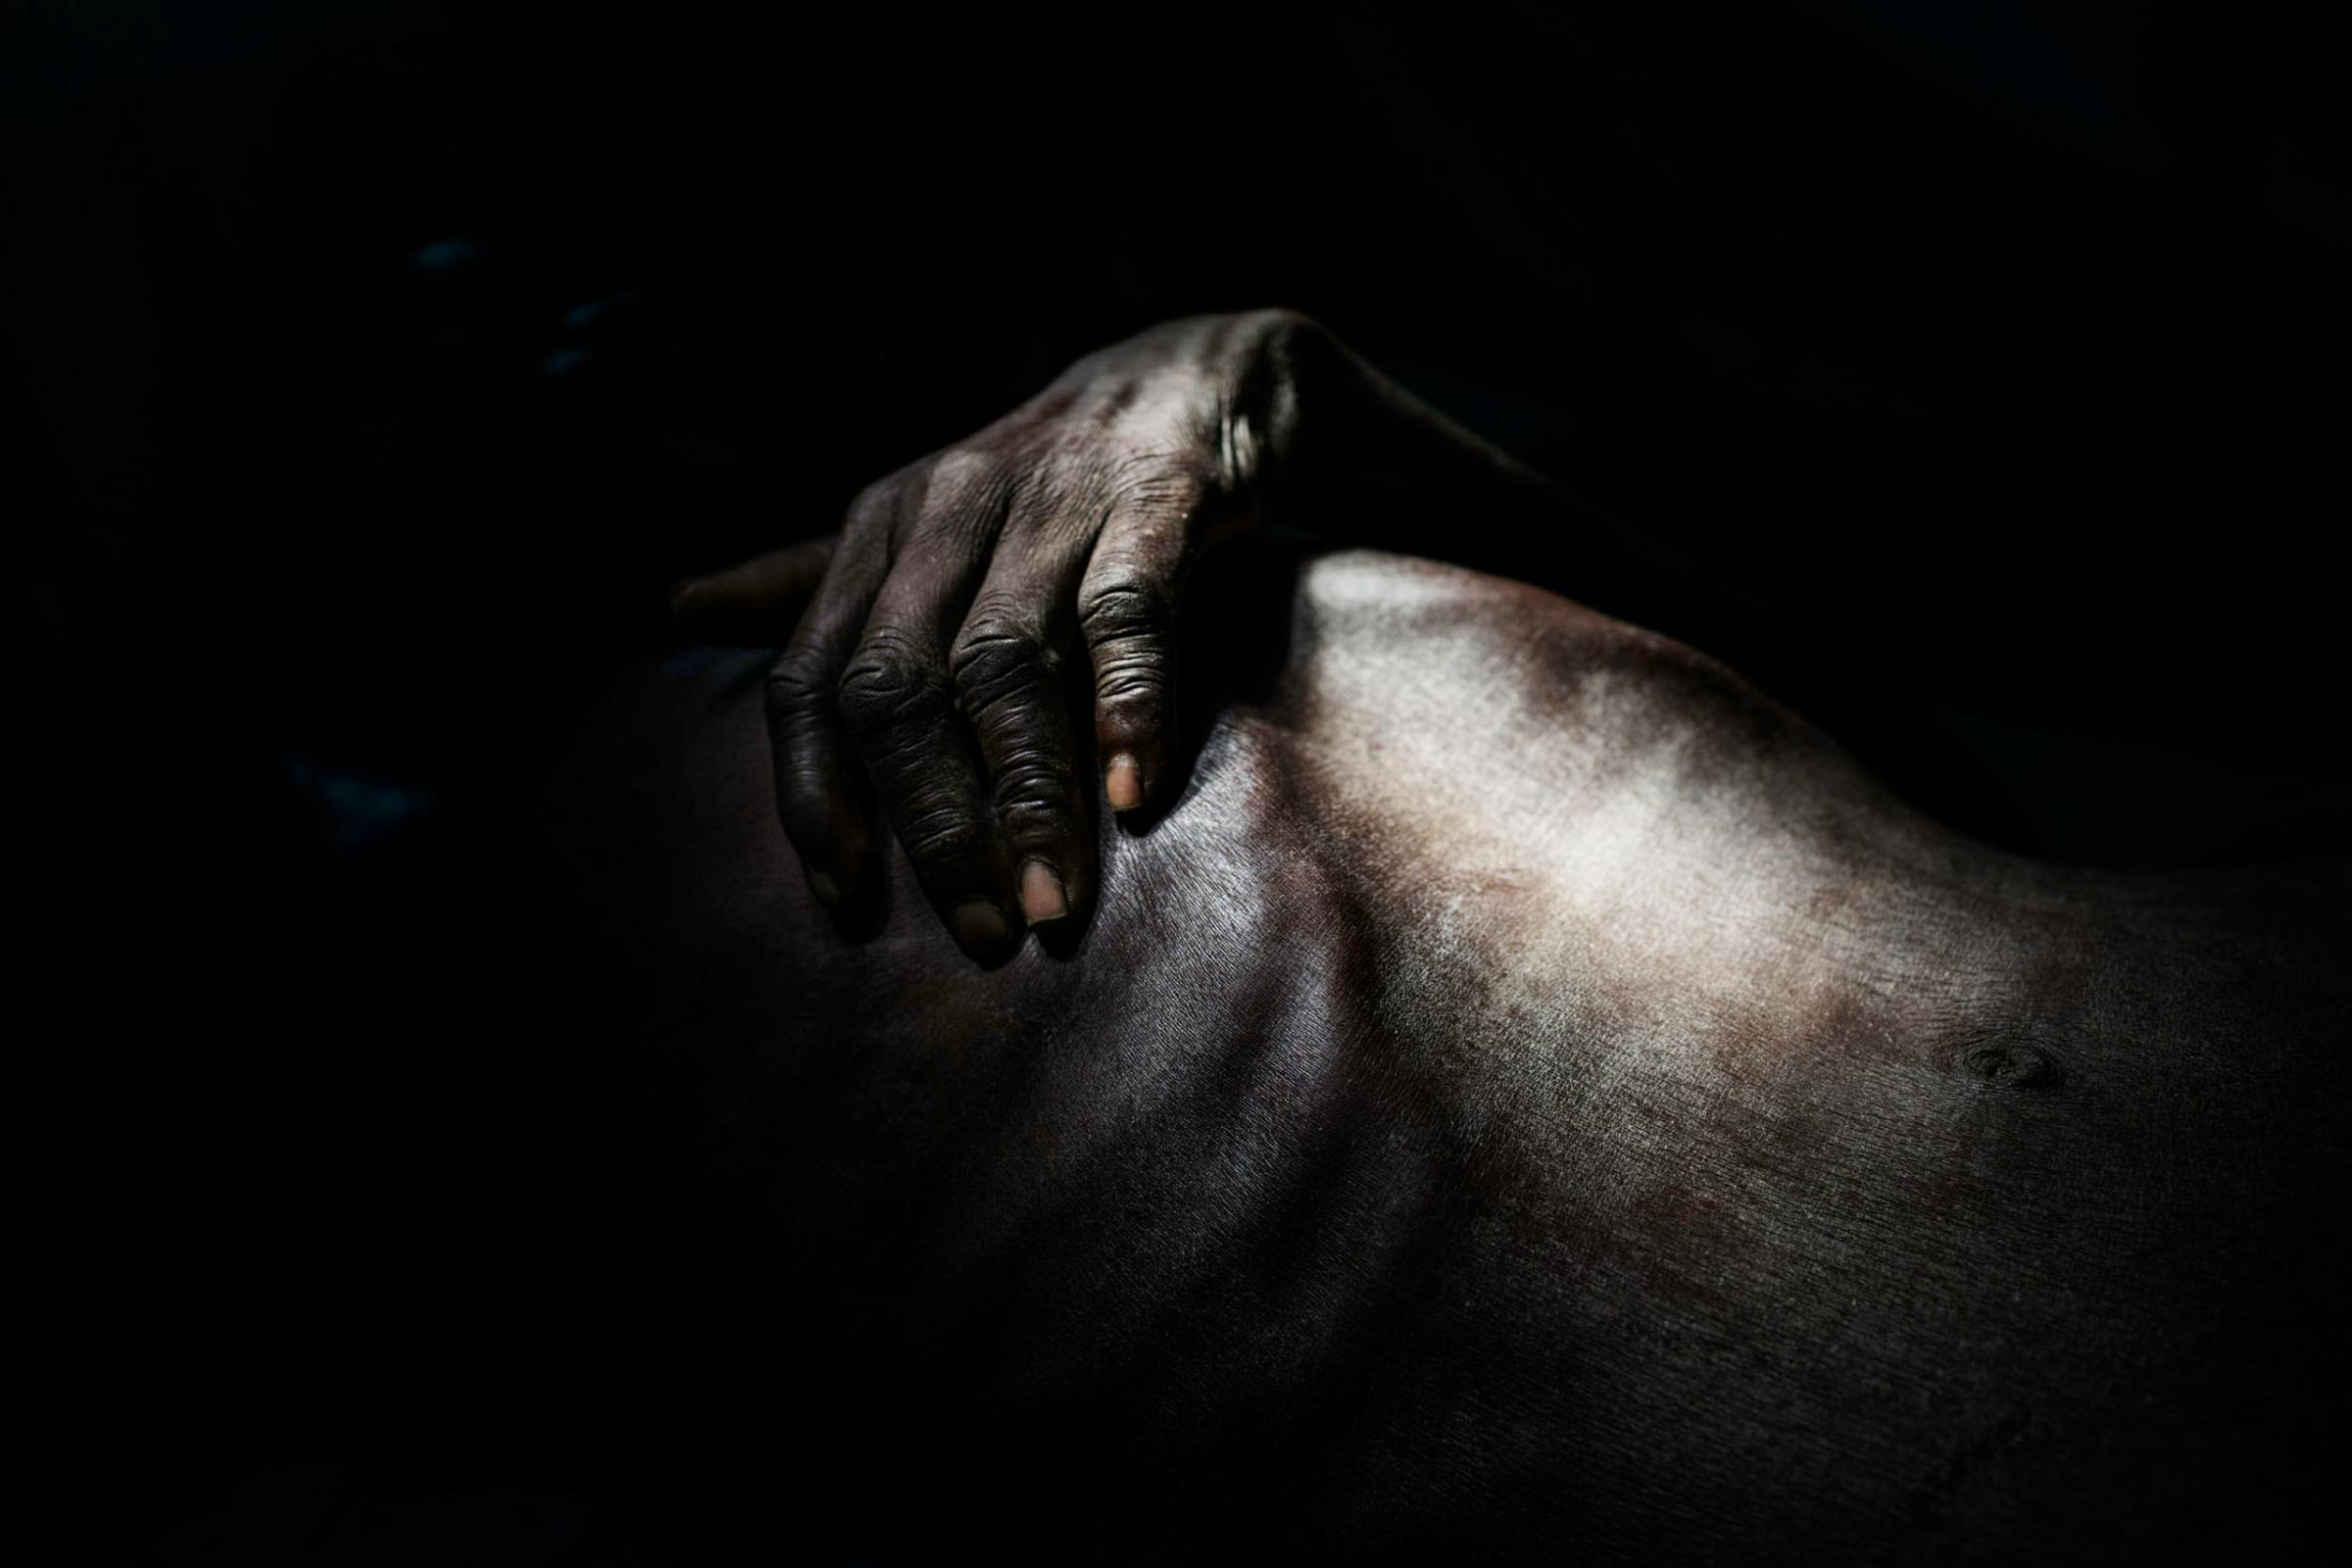 Per Chan, 60, rests inside the surgical ward in the Doctors Without Borders hospital in Lankien, Jonglei State, South Sudan. He was shot in the leg while trying to escape a raid by government forces in his village near Leer in Unity State.